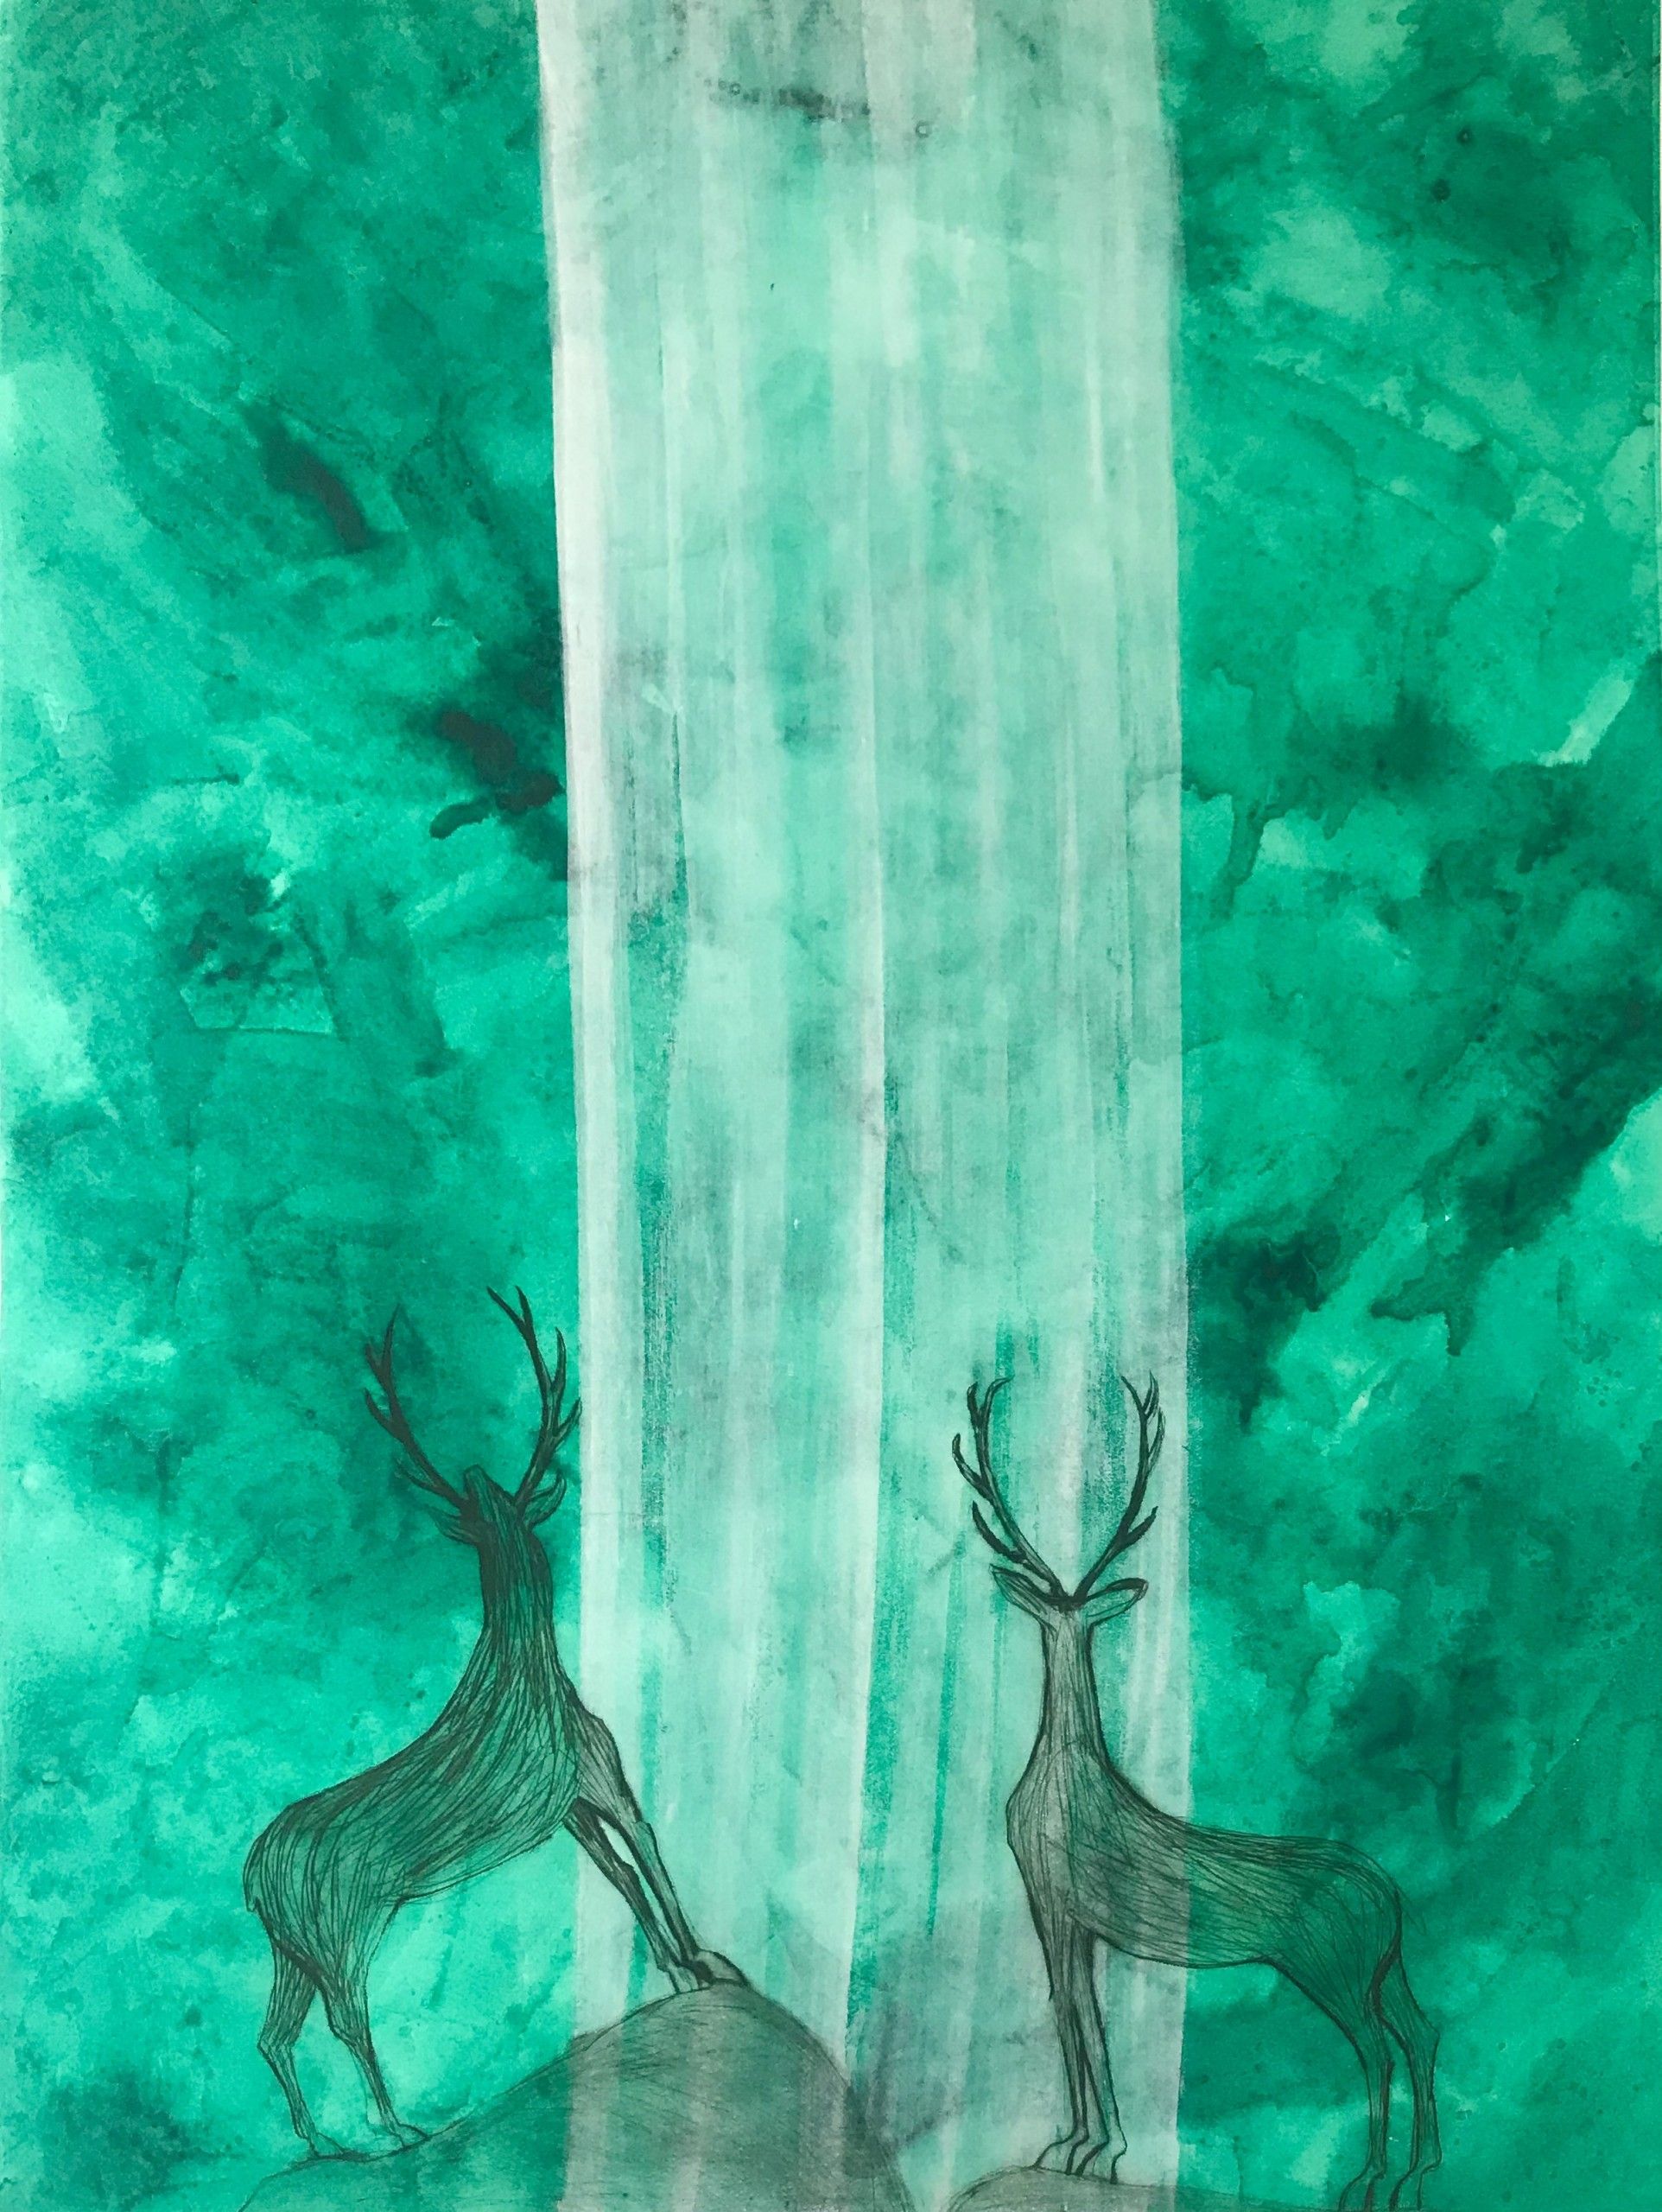 Stags Admiring a Waterfall by Kate Boxer